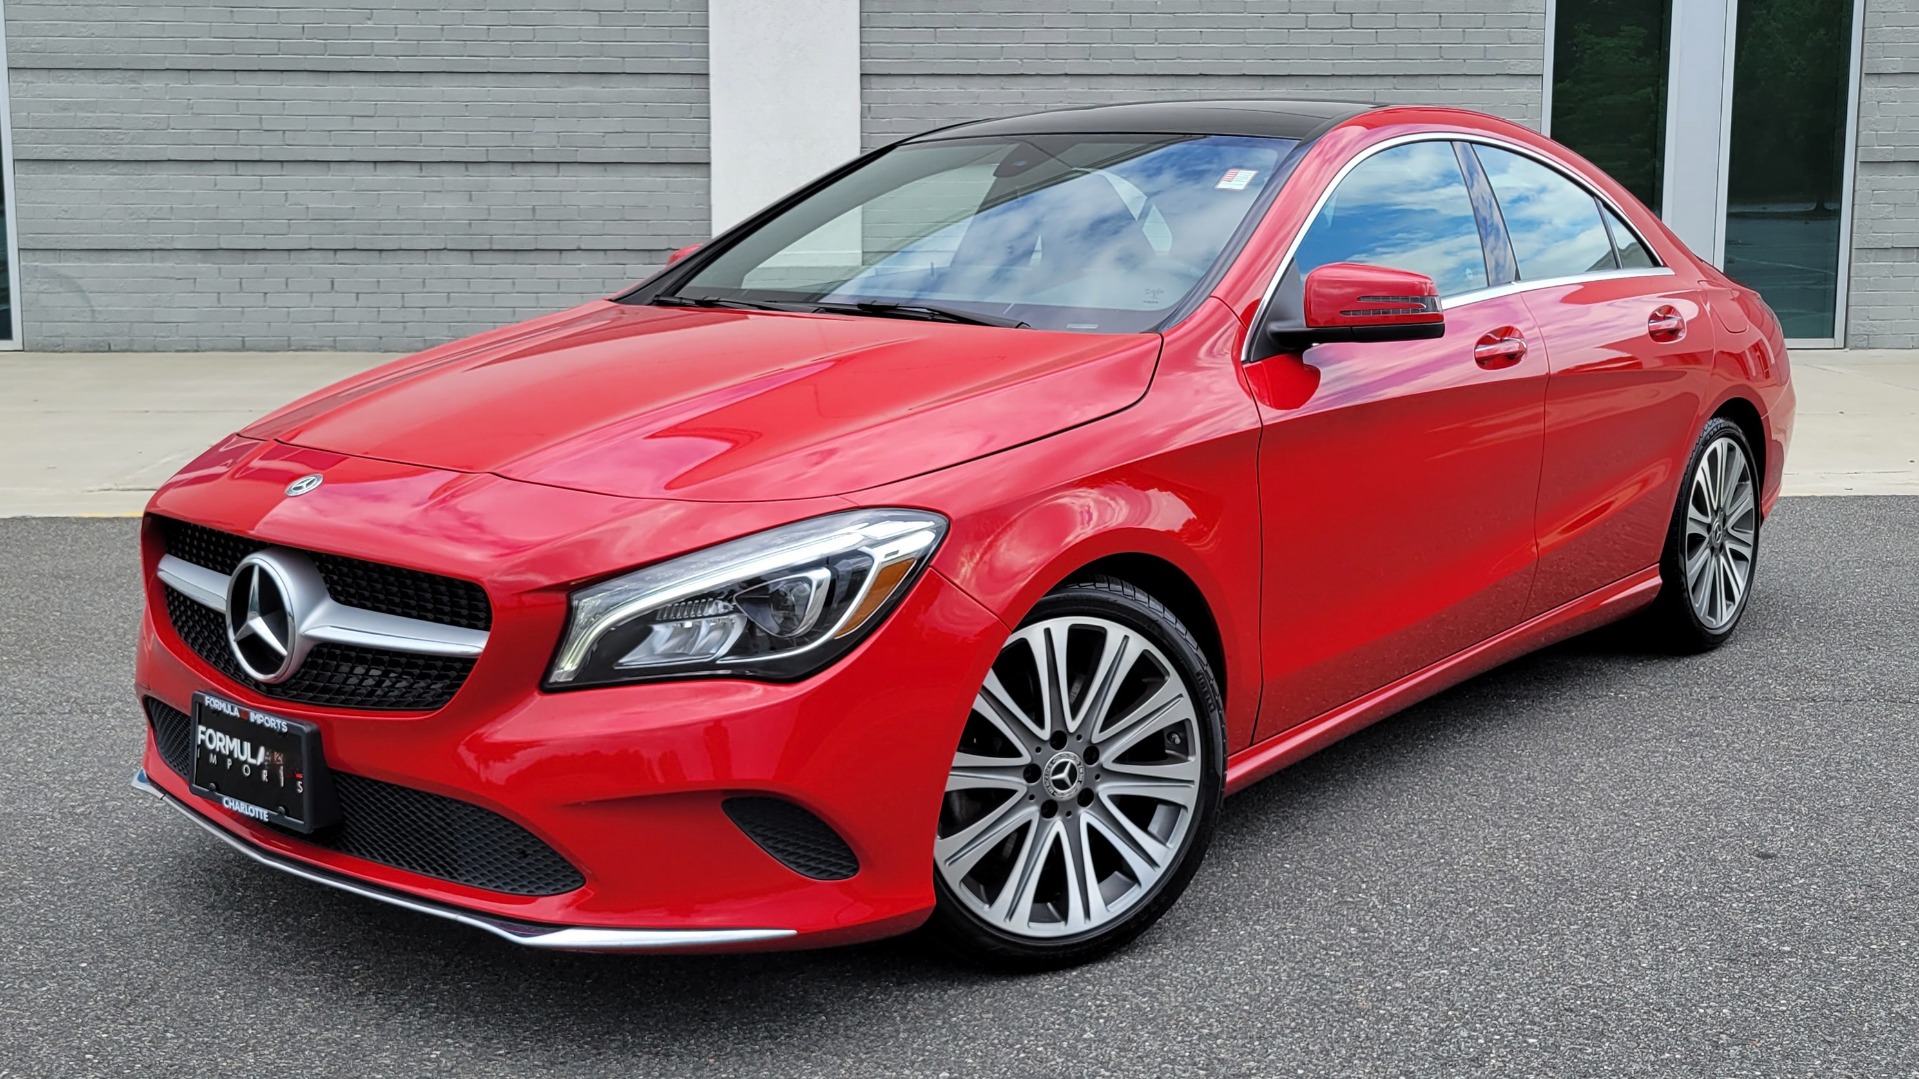 Used 2019 Mercedes-Benz CLA 250 PREMIUM / CONV PKG / PANO-ROOF / H/K SND / CAMERA for sale $31,995 at Formula Imports in Charlotte NC 28227 1